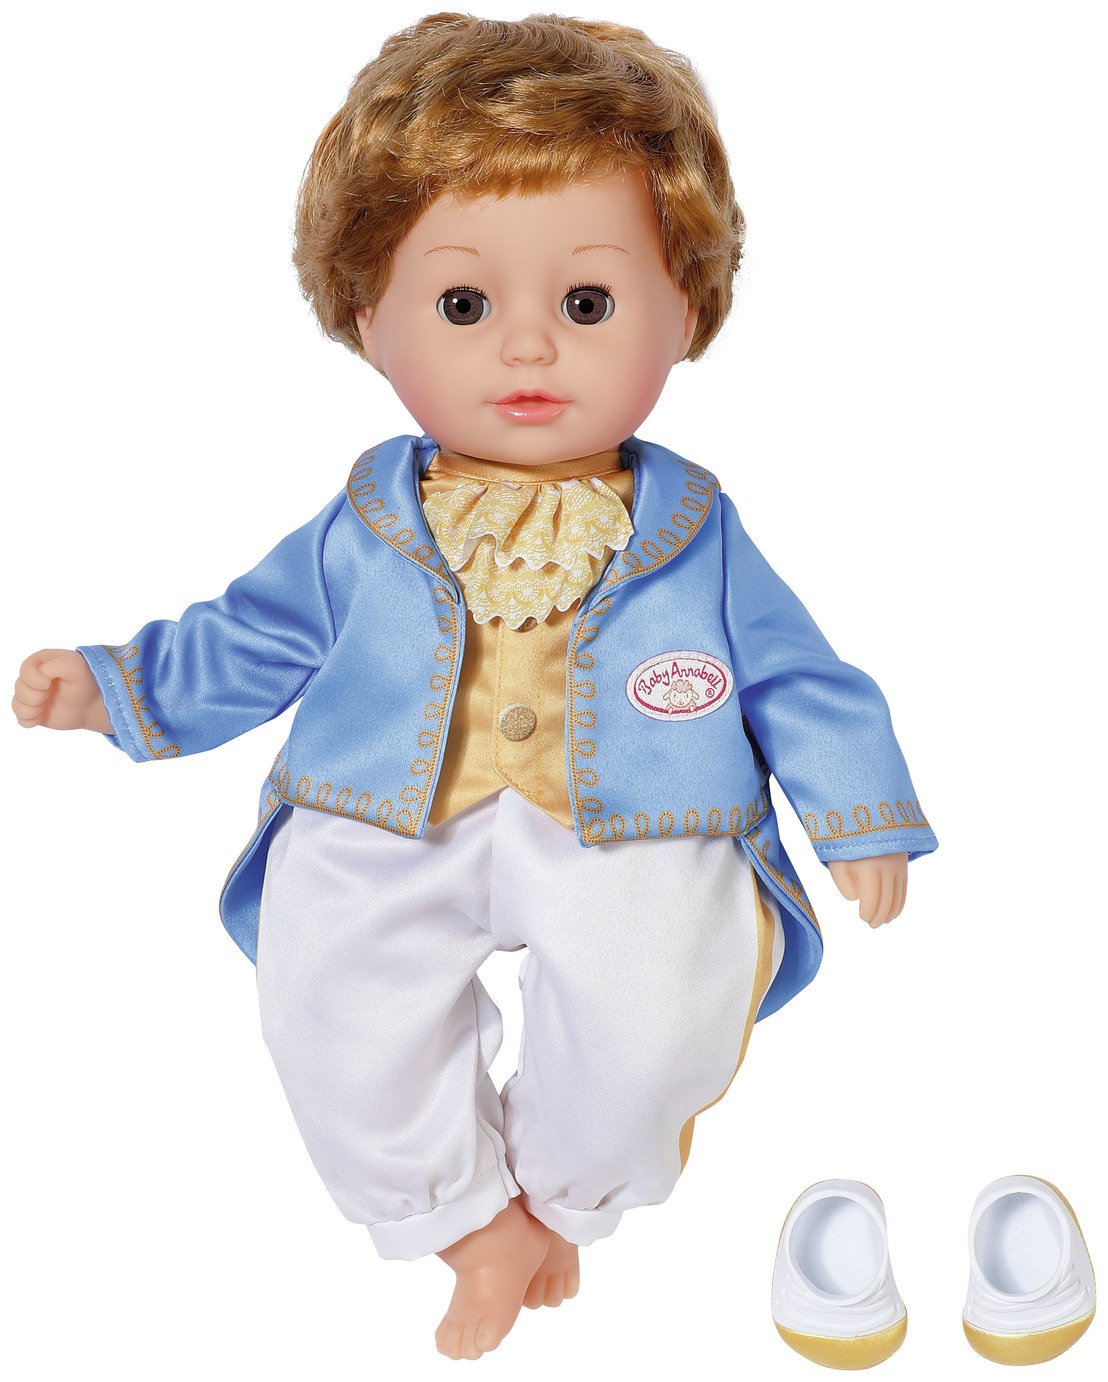 Baby Annabel Little Sweet Prince Doll - 14inch/34cm